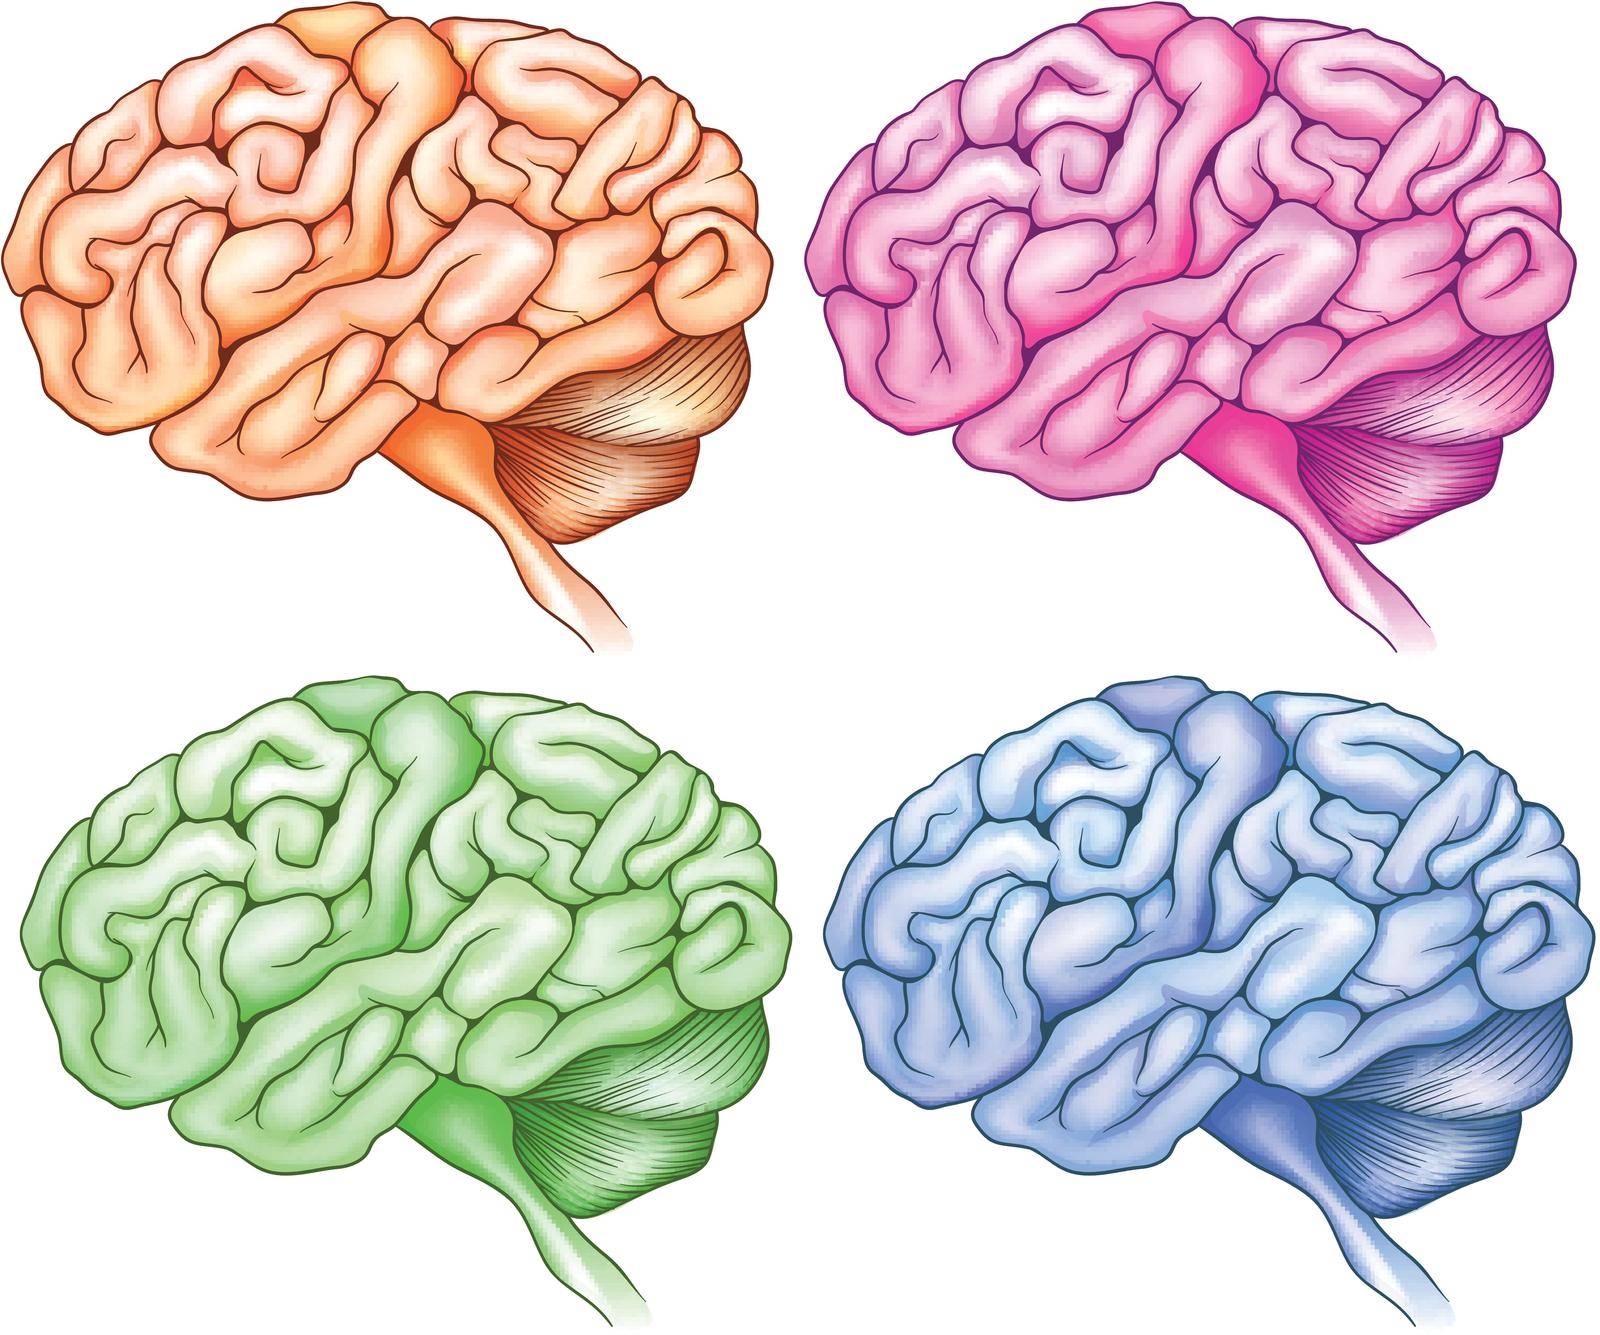 Illustration of the human brains on a white background